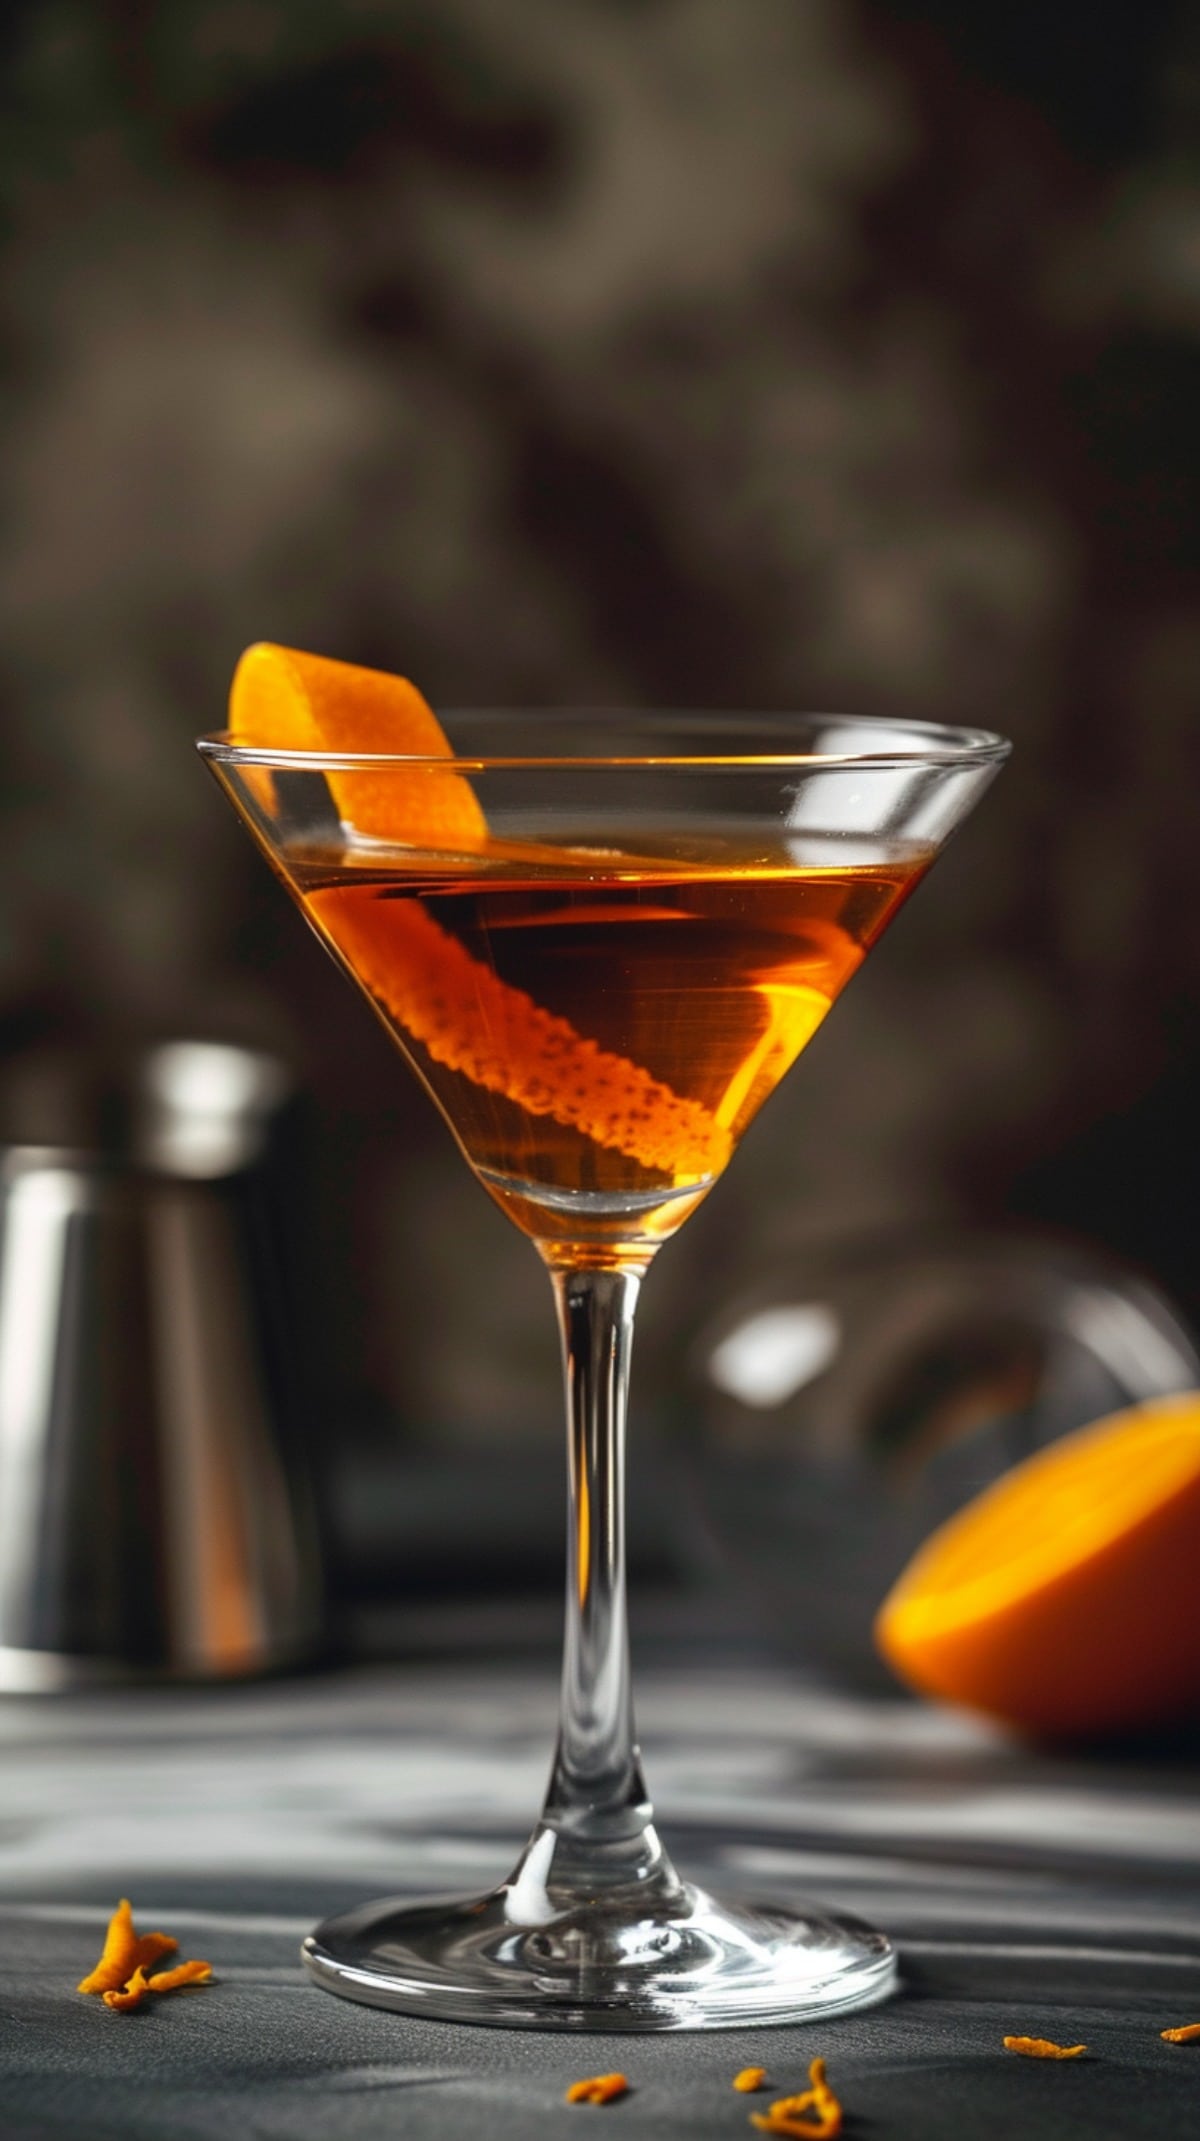 Toronto cocktail in a martini glass with an orange twist